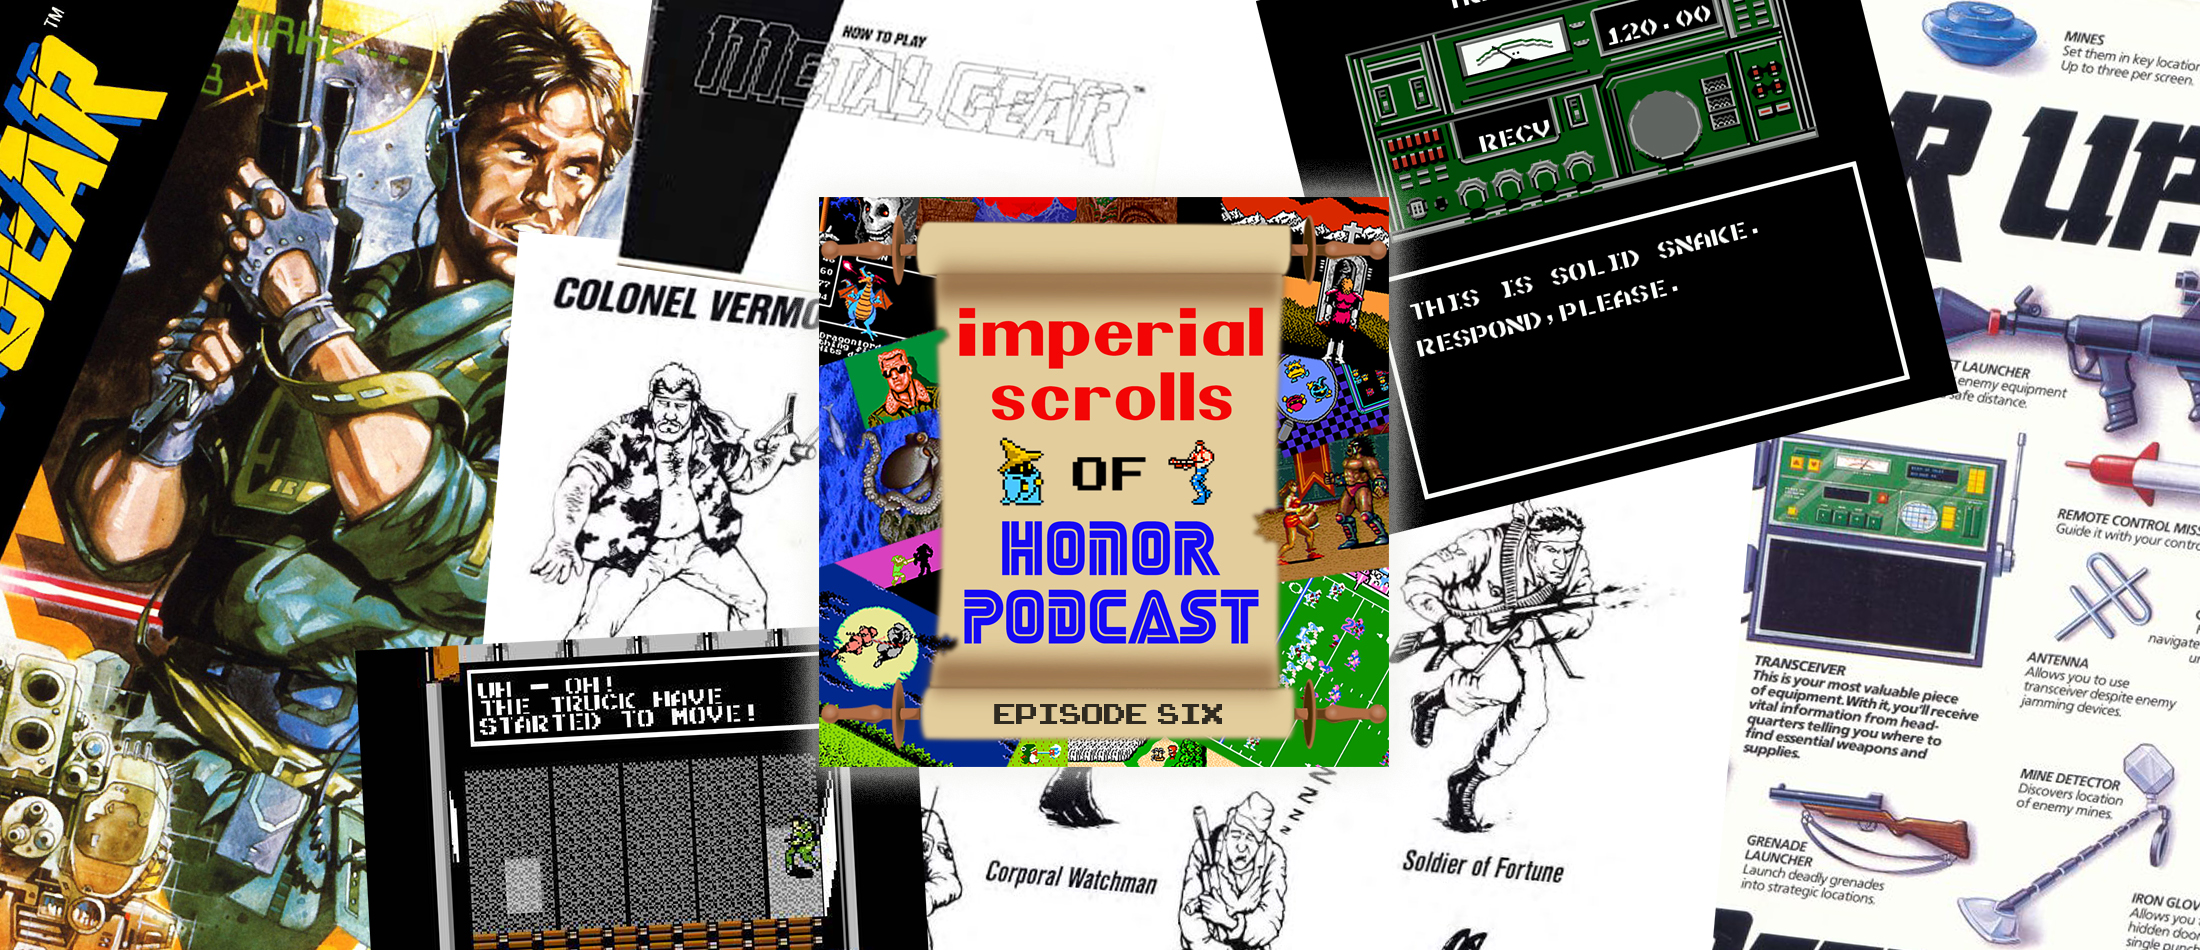 Imperial Scrolls of Honor Podcast - Episode 6 - Metal Gear (NES)